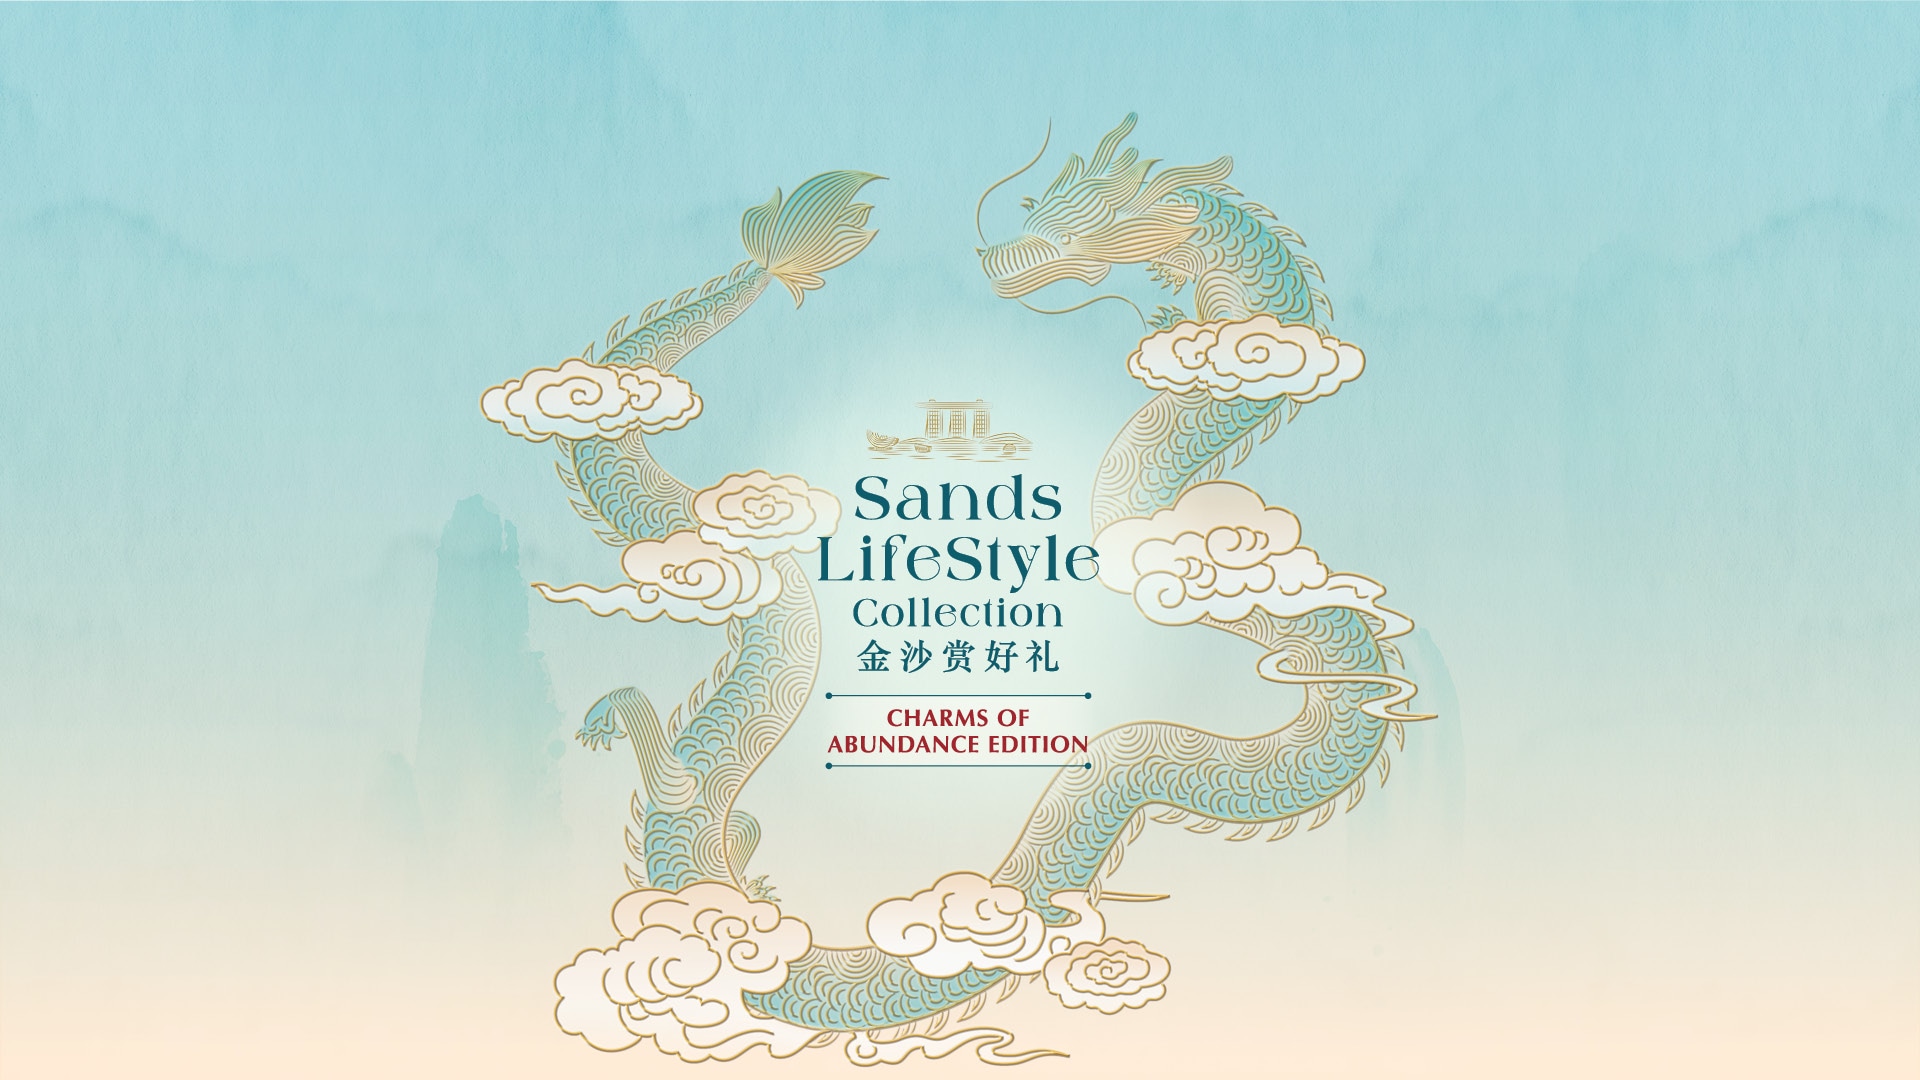 SANDS LIFESTYLE COLLECTION: CHARMS OF ABUNDANCE EDITION